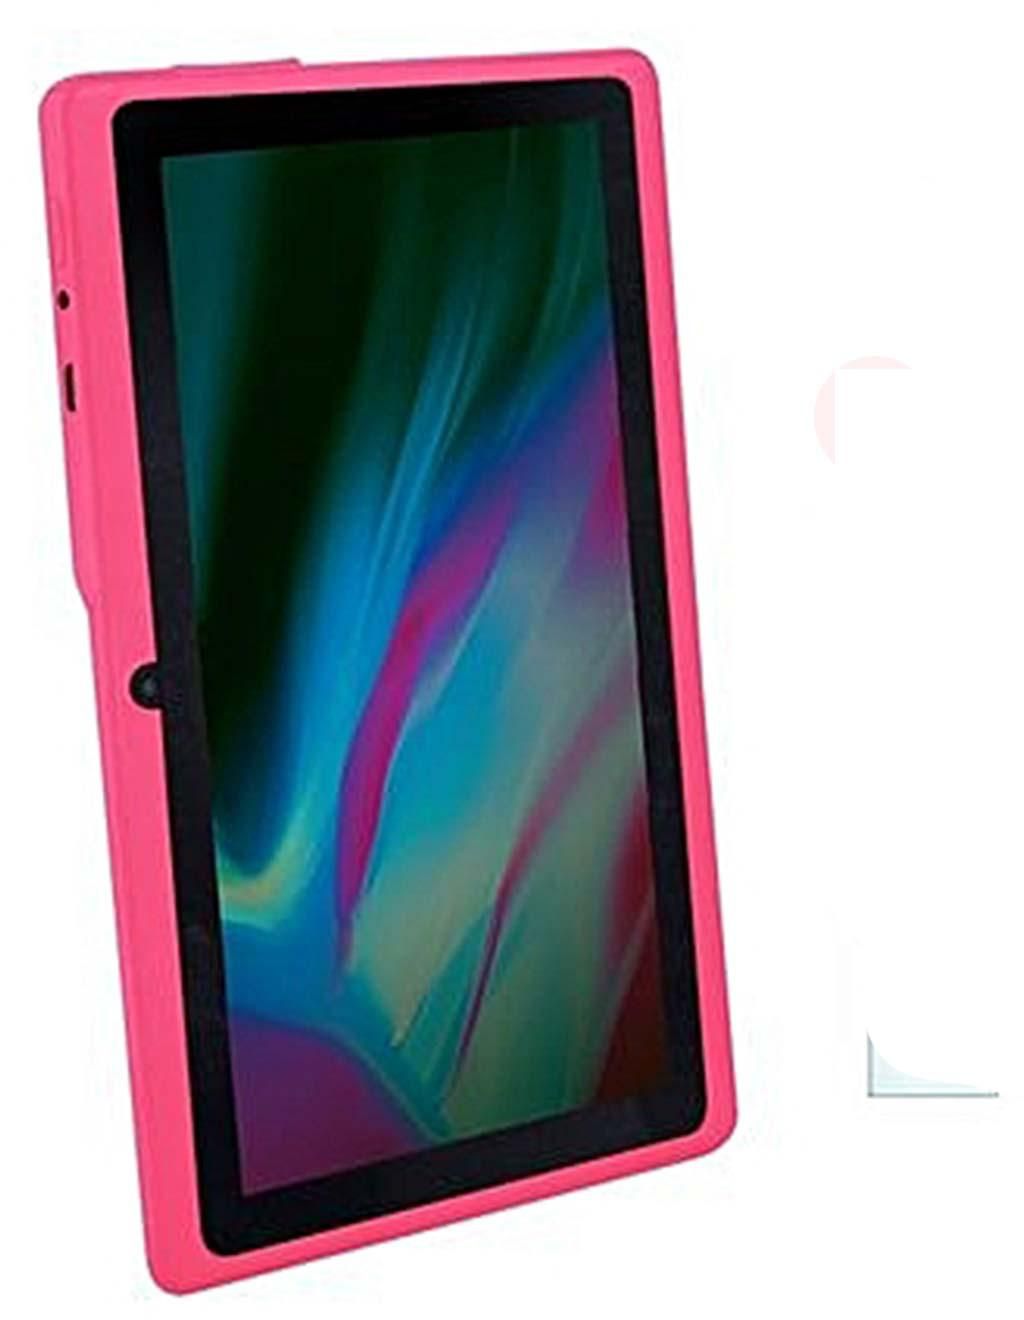 WINTOUCH Q75S Tablet - 7 inch, 8GB, 512MB RAM, WiFi, Pink